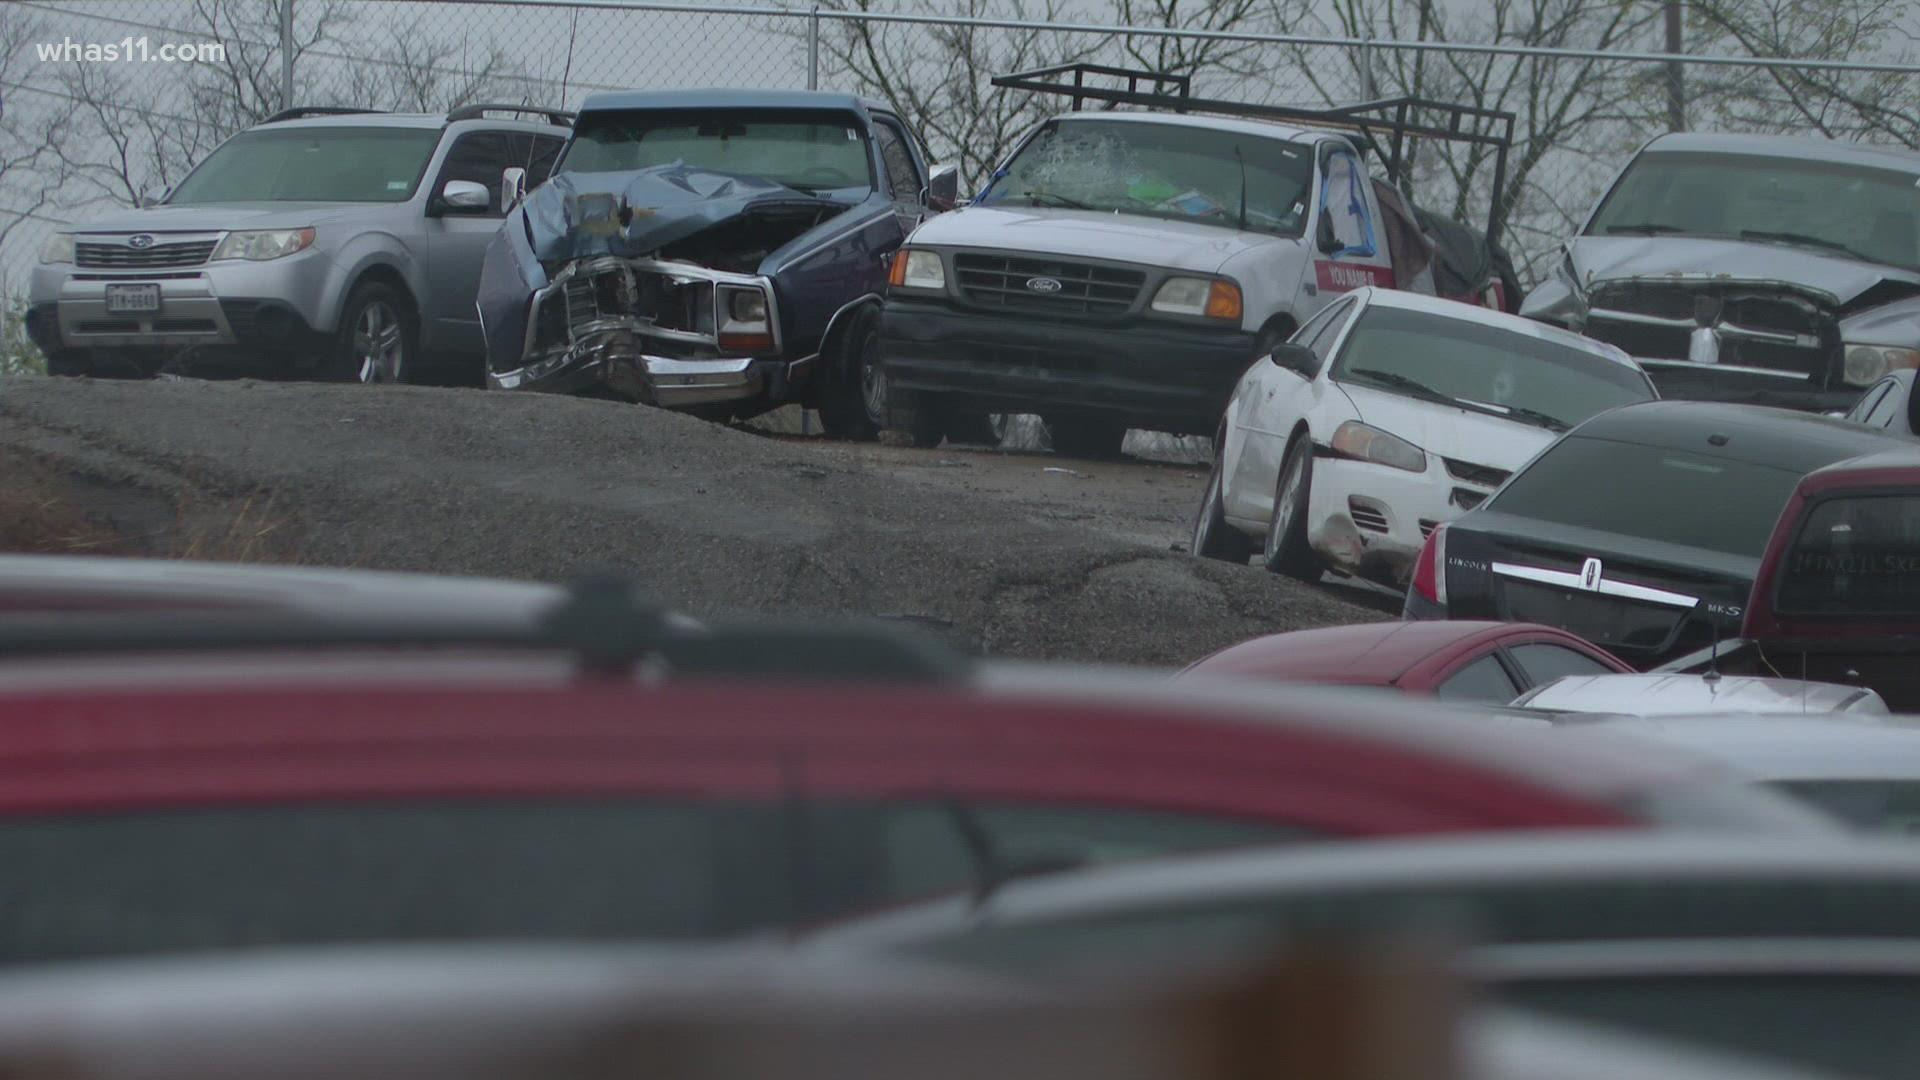 Louisville Maj. Emily McKinley said it's the latest effort to empty the overcrowded impound lot.